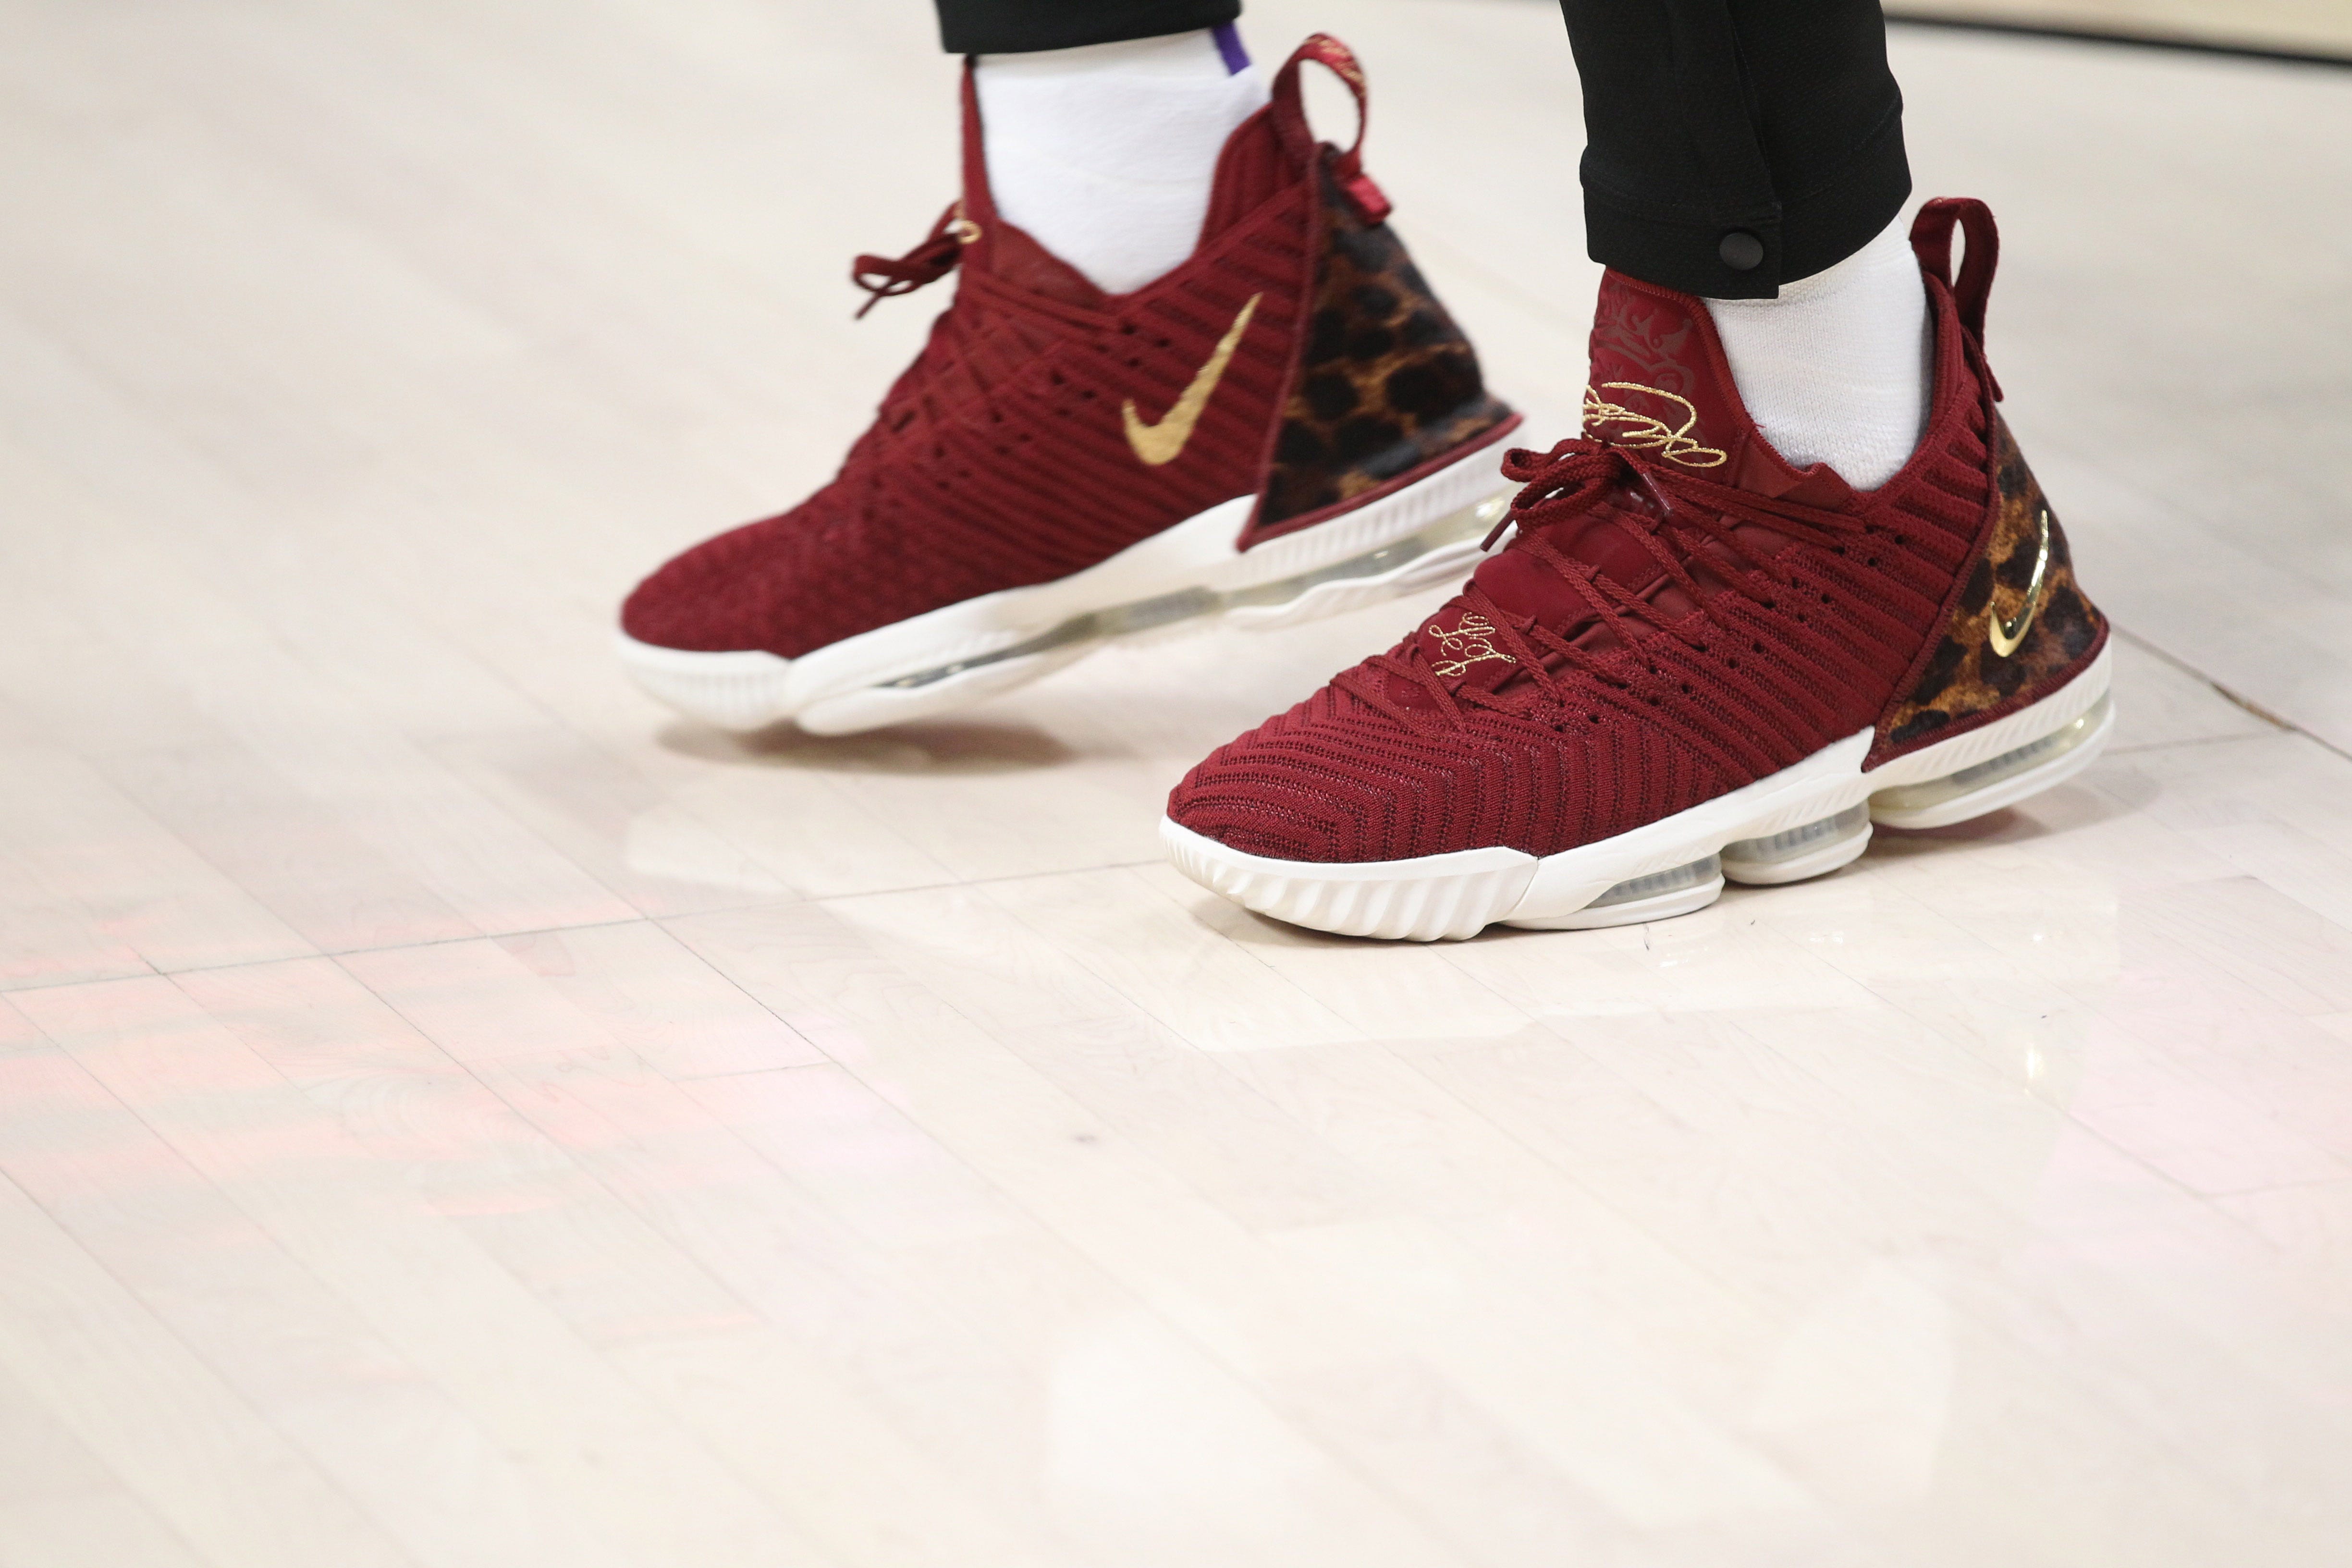 LeBron James: Gold and burgundy shoes 